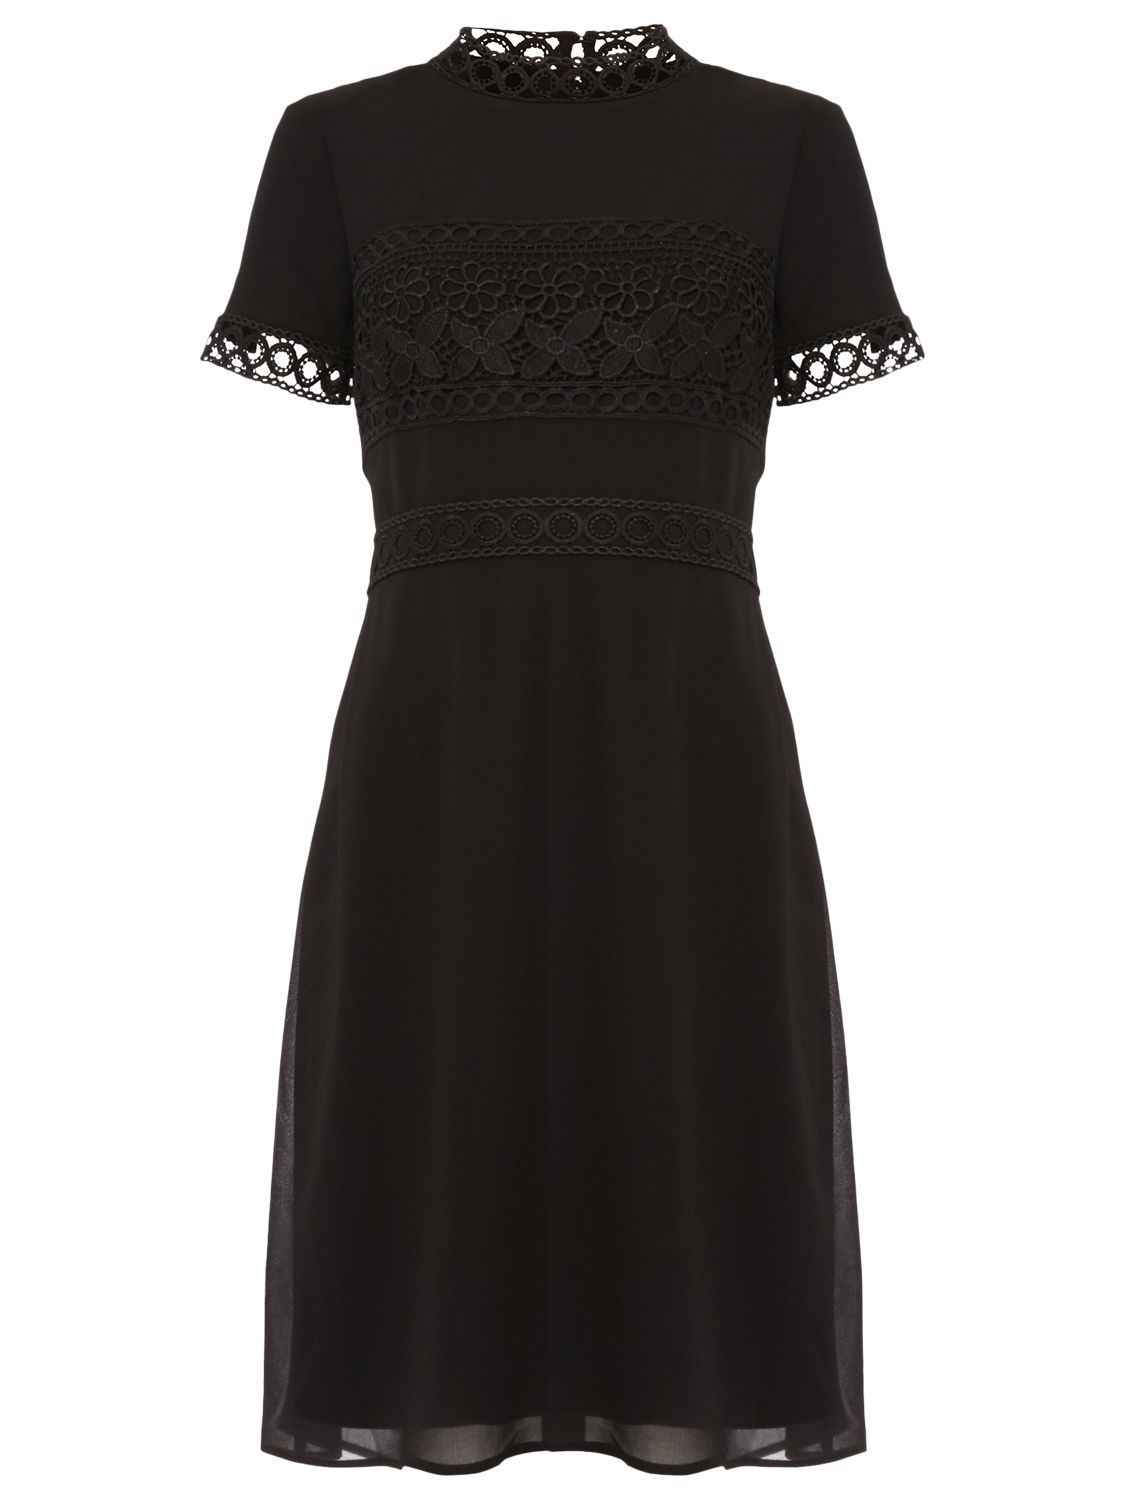 Phase Eight Ivanna Guipure Lace Dress, Black at John Lewis & Partners